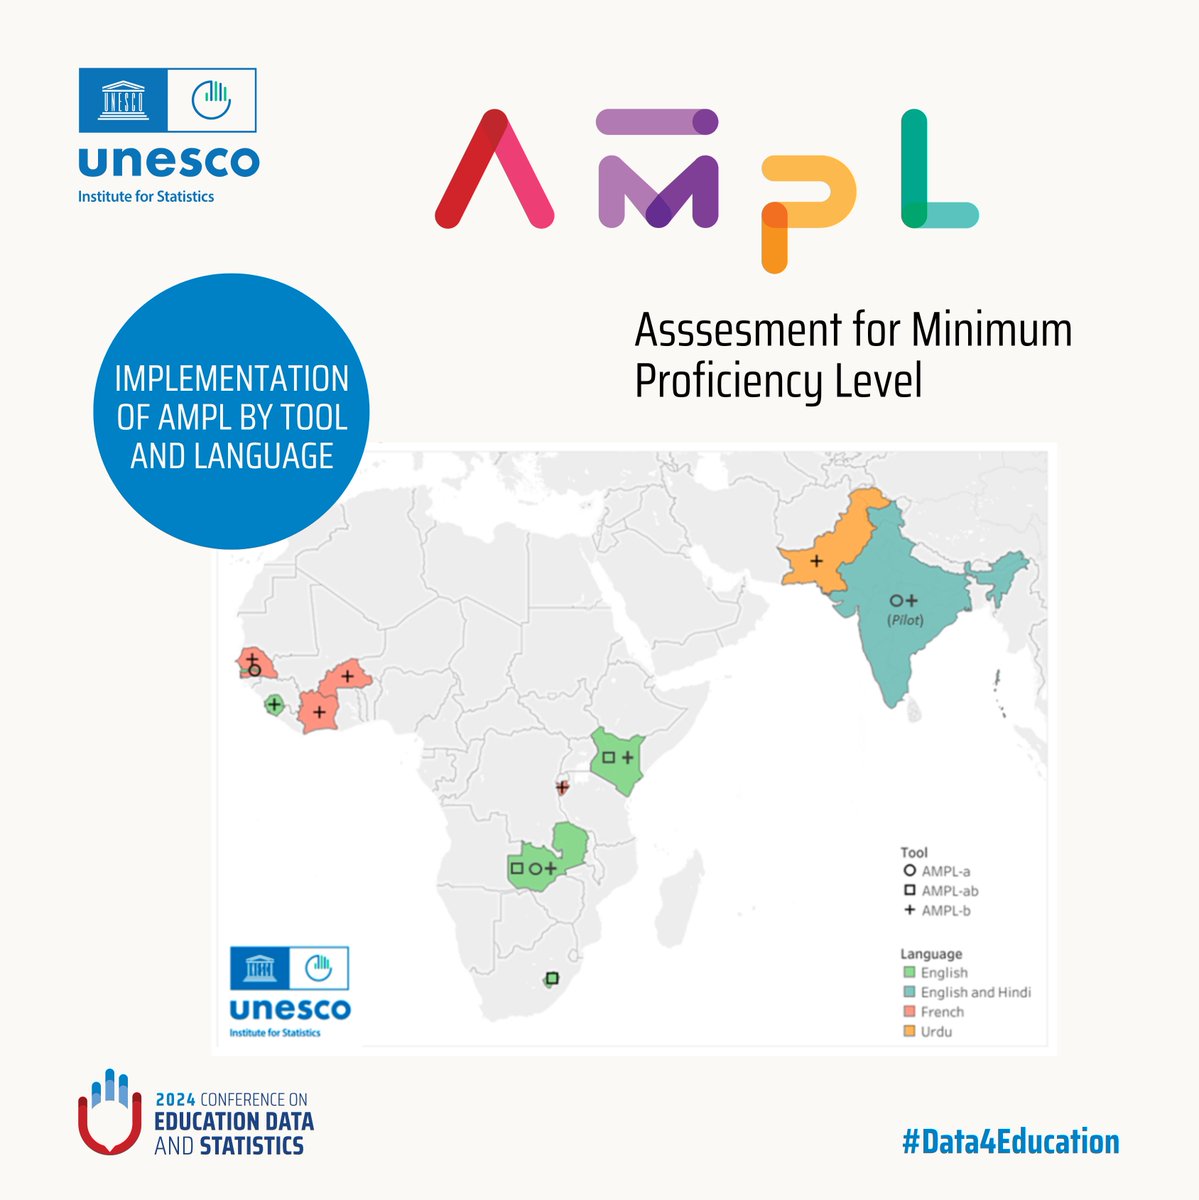 The AMPL aims to align national and cross-national assessment programs to a single set of global standards. 
See #WorldEducationBlog @GEMReport for insights on how AMPL helps develop country capacity to measure education outcomes.
bit.ly/about-ampl
ampl.uis.unesco.org